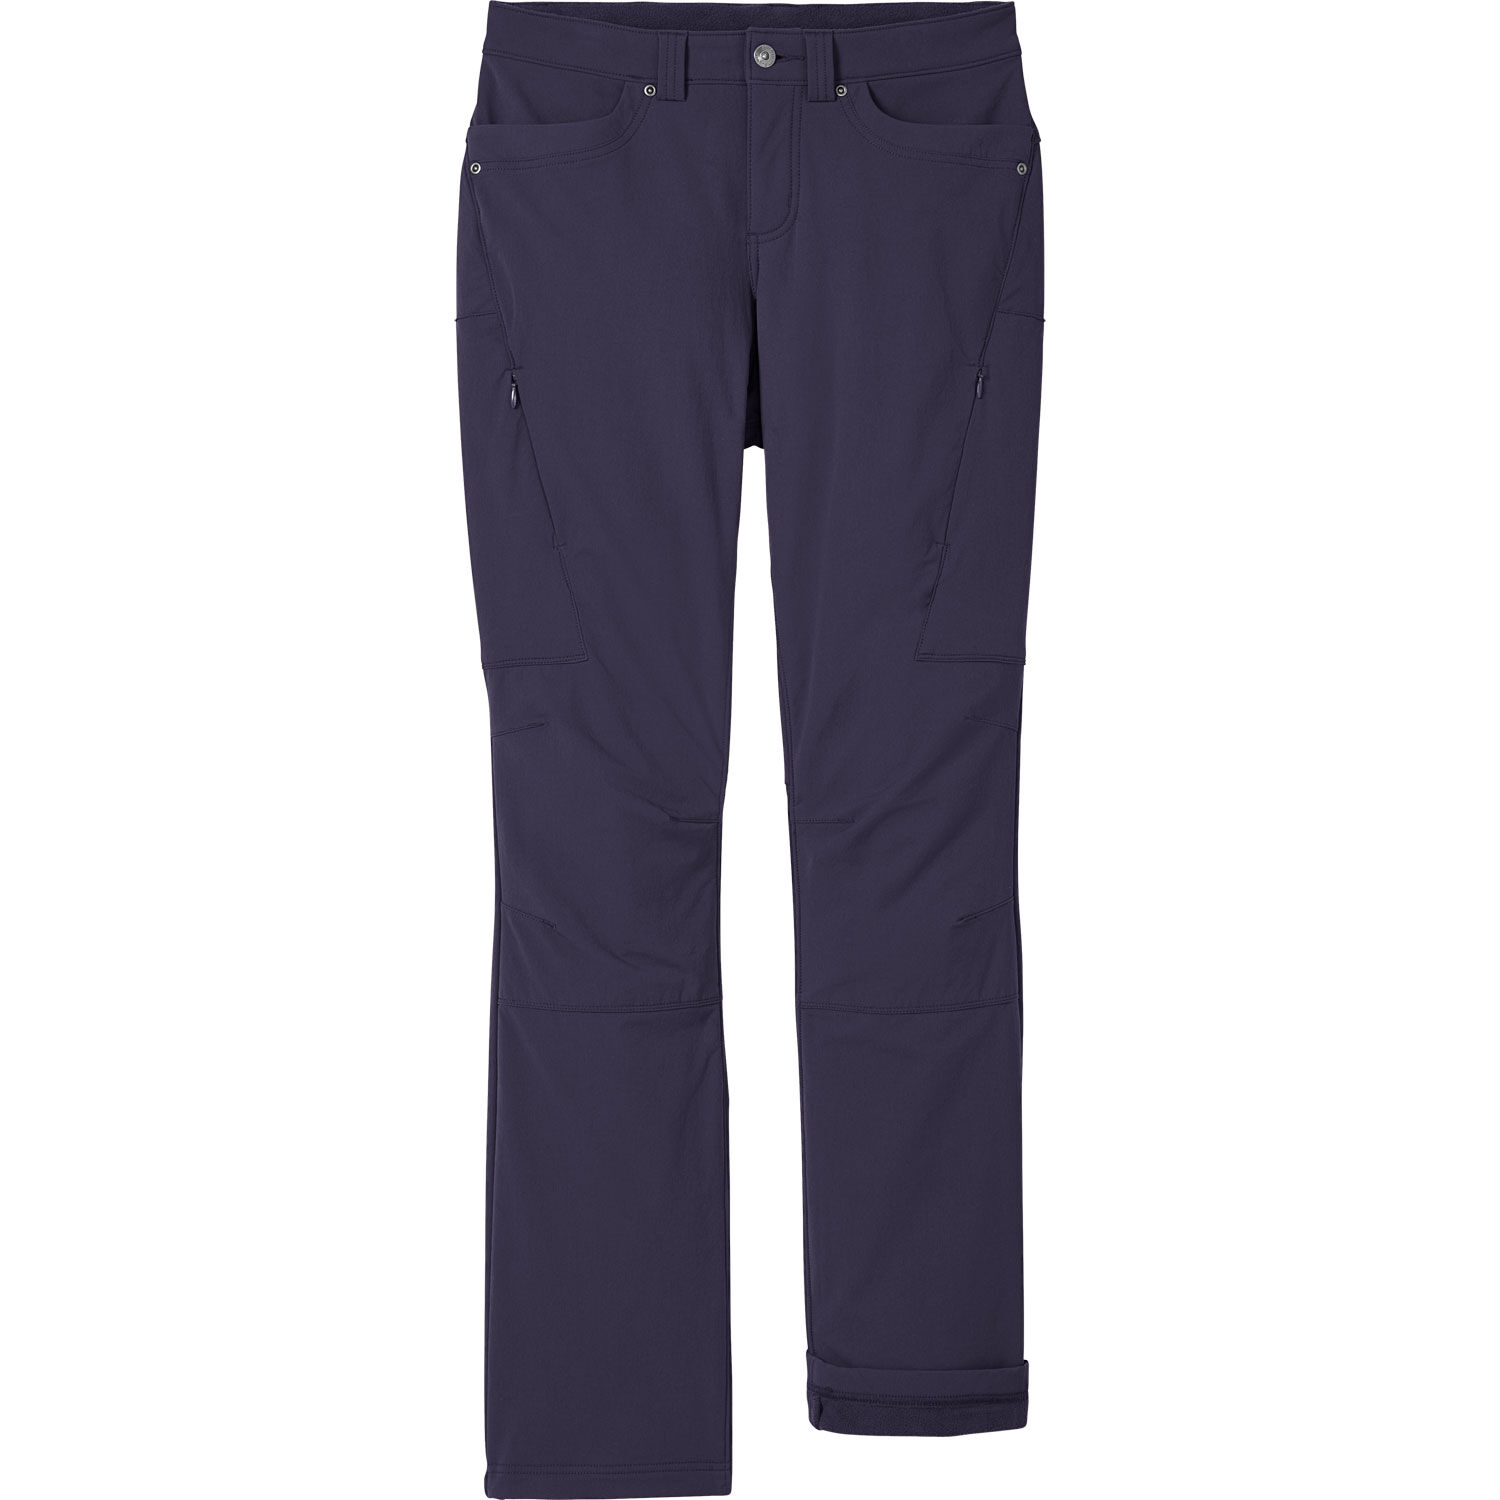 Amalfi Faded Navy Cotton and Linen Stretch Drawstring Pant